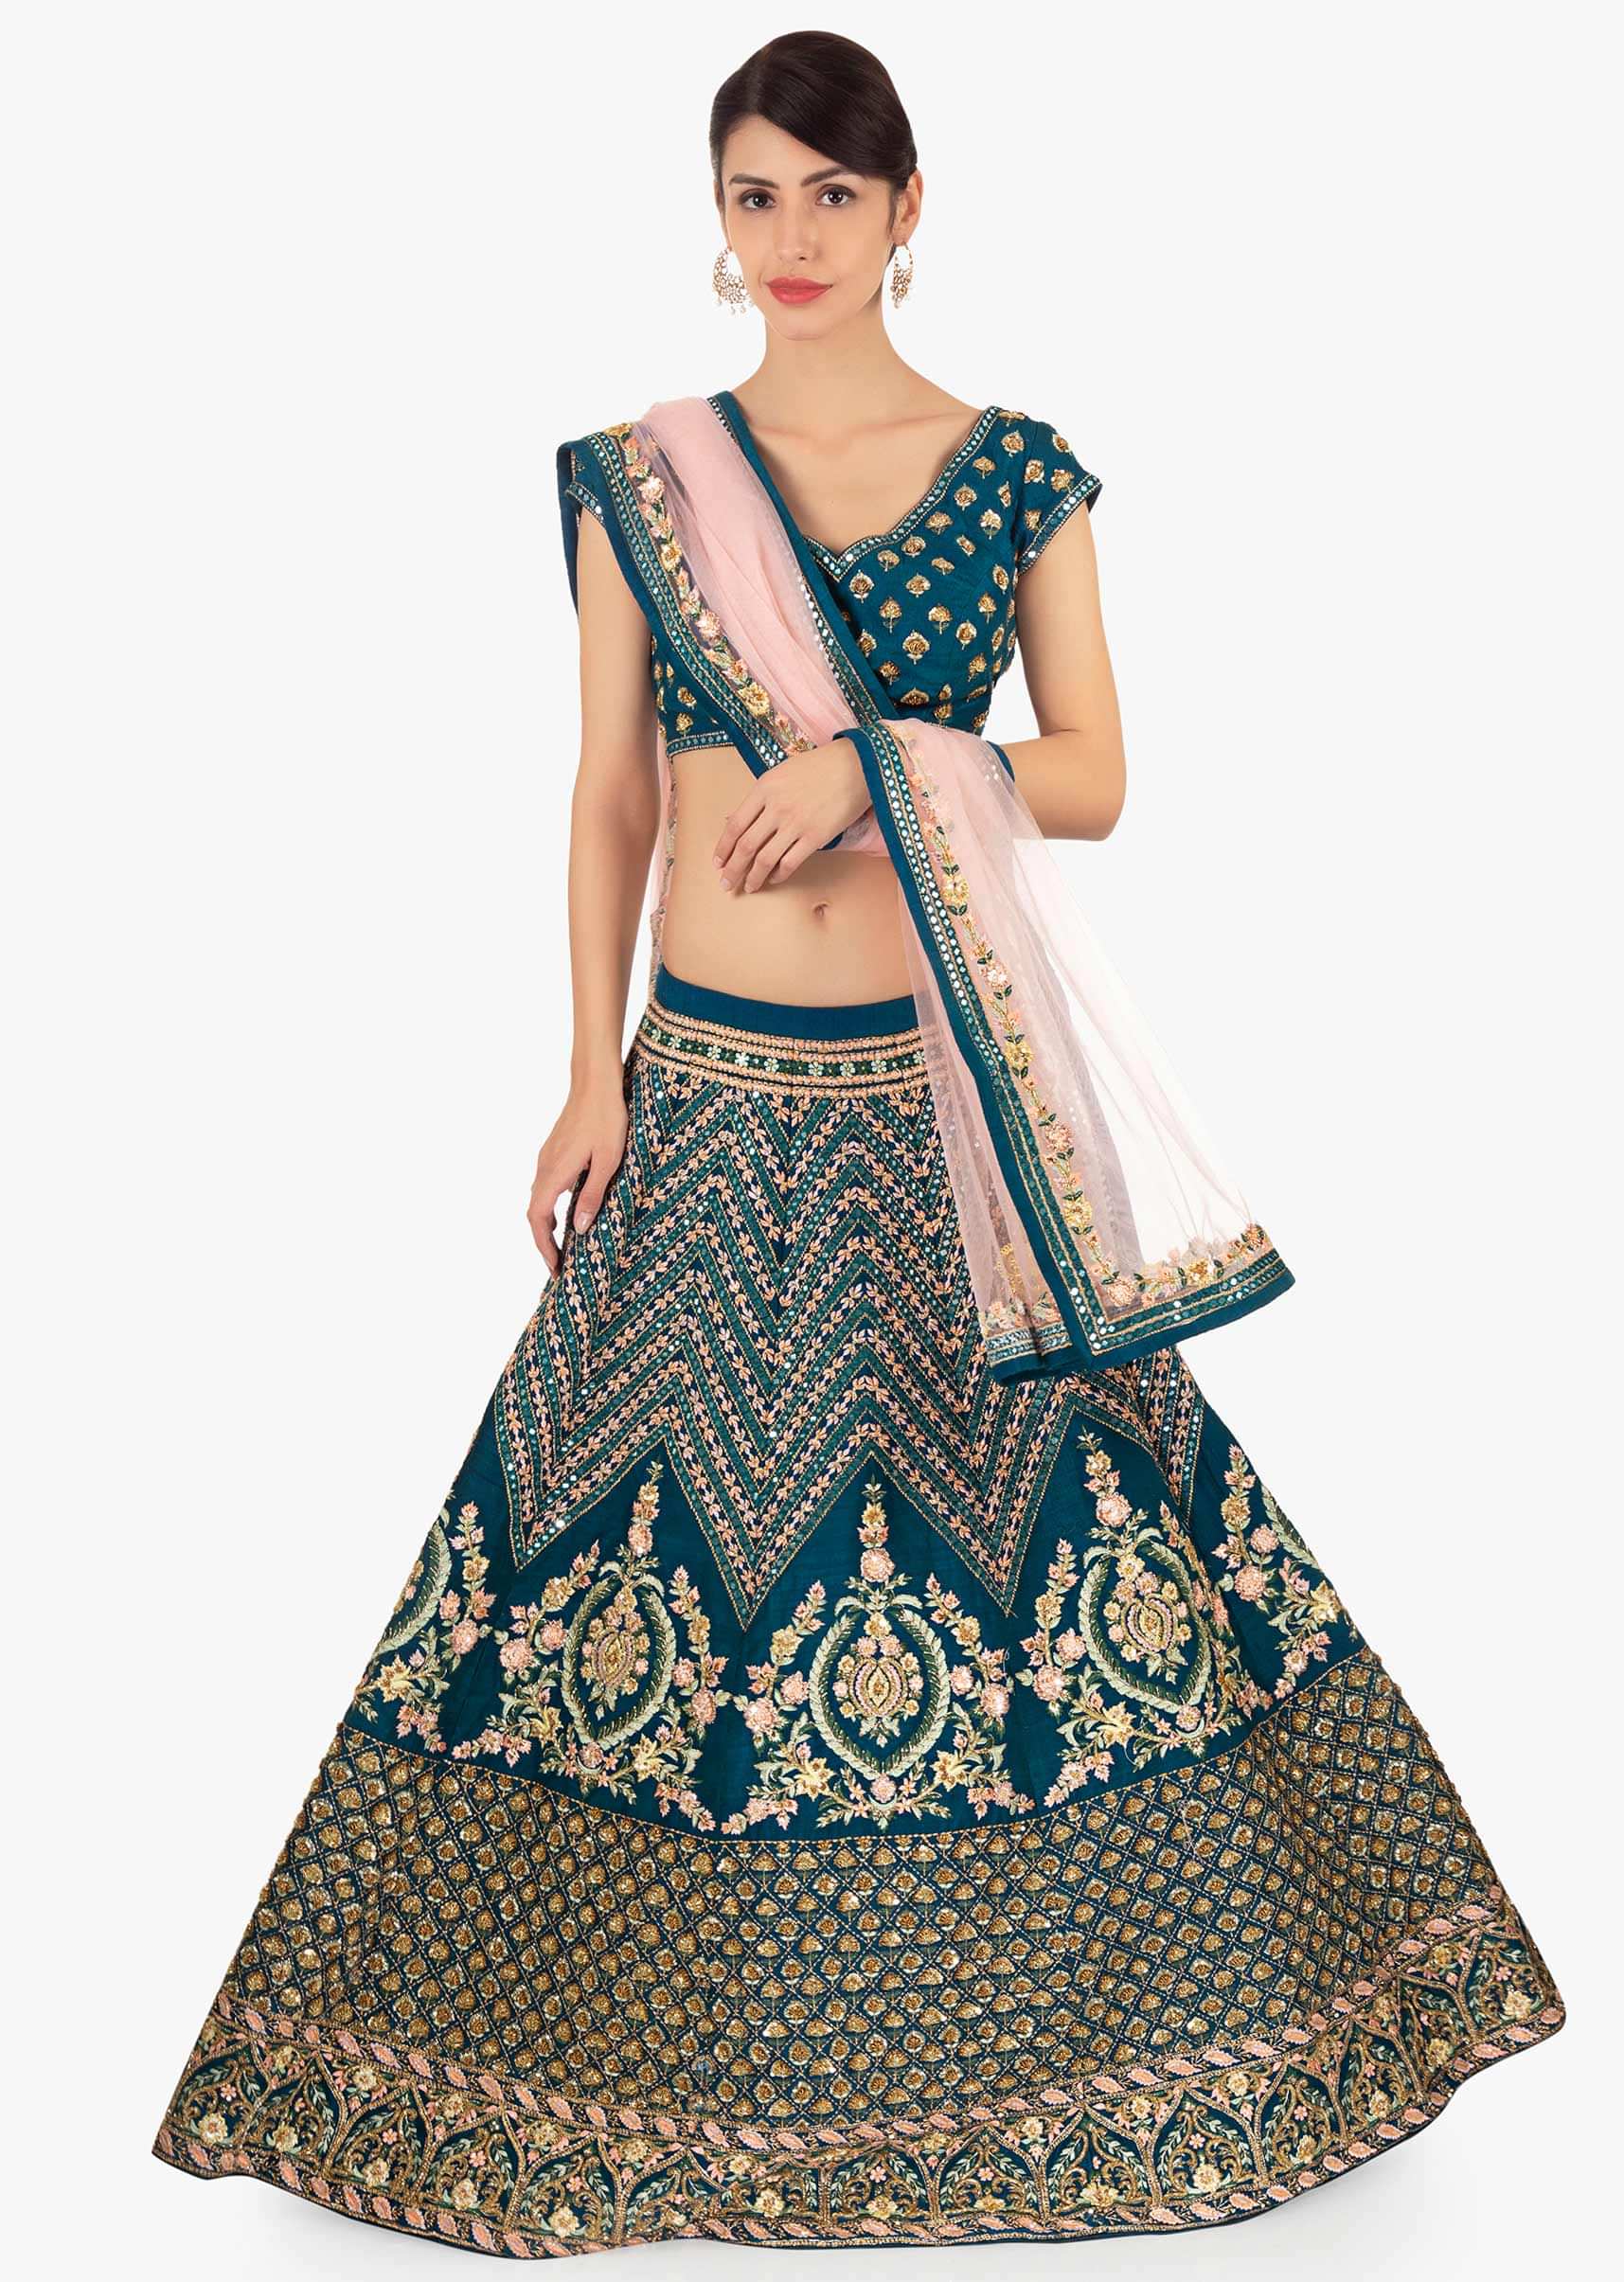 Admiral Blue Lehenga In Raw Silk With Geometric Motif Paired With Matching Blouse And Pink Net Dupatta Online - Kalki Fashion